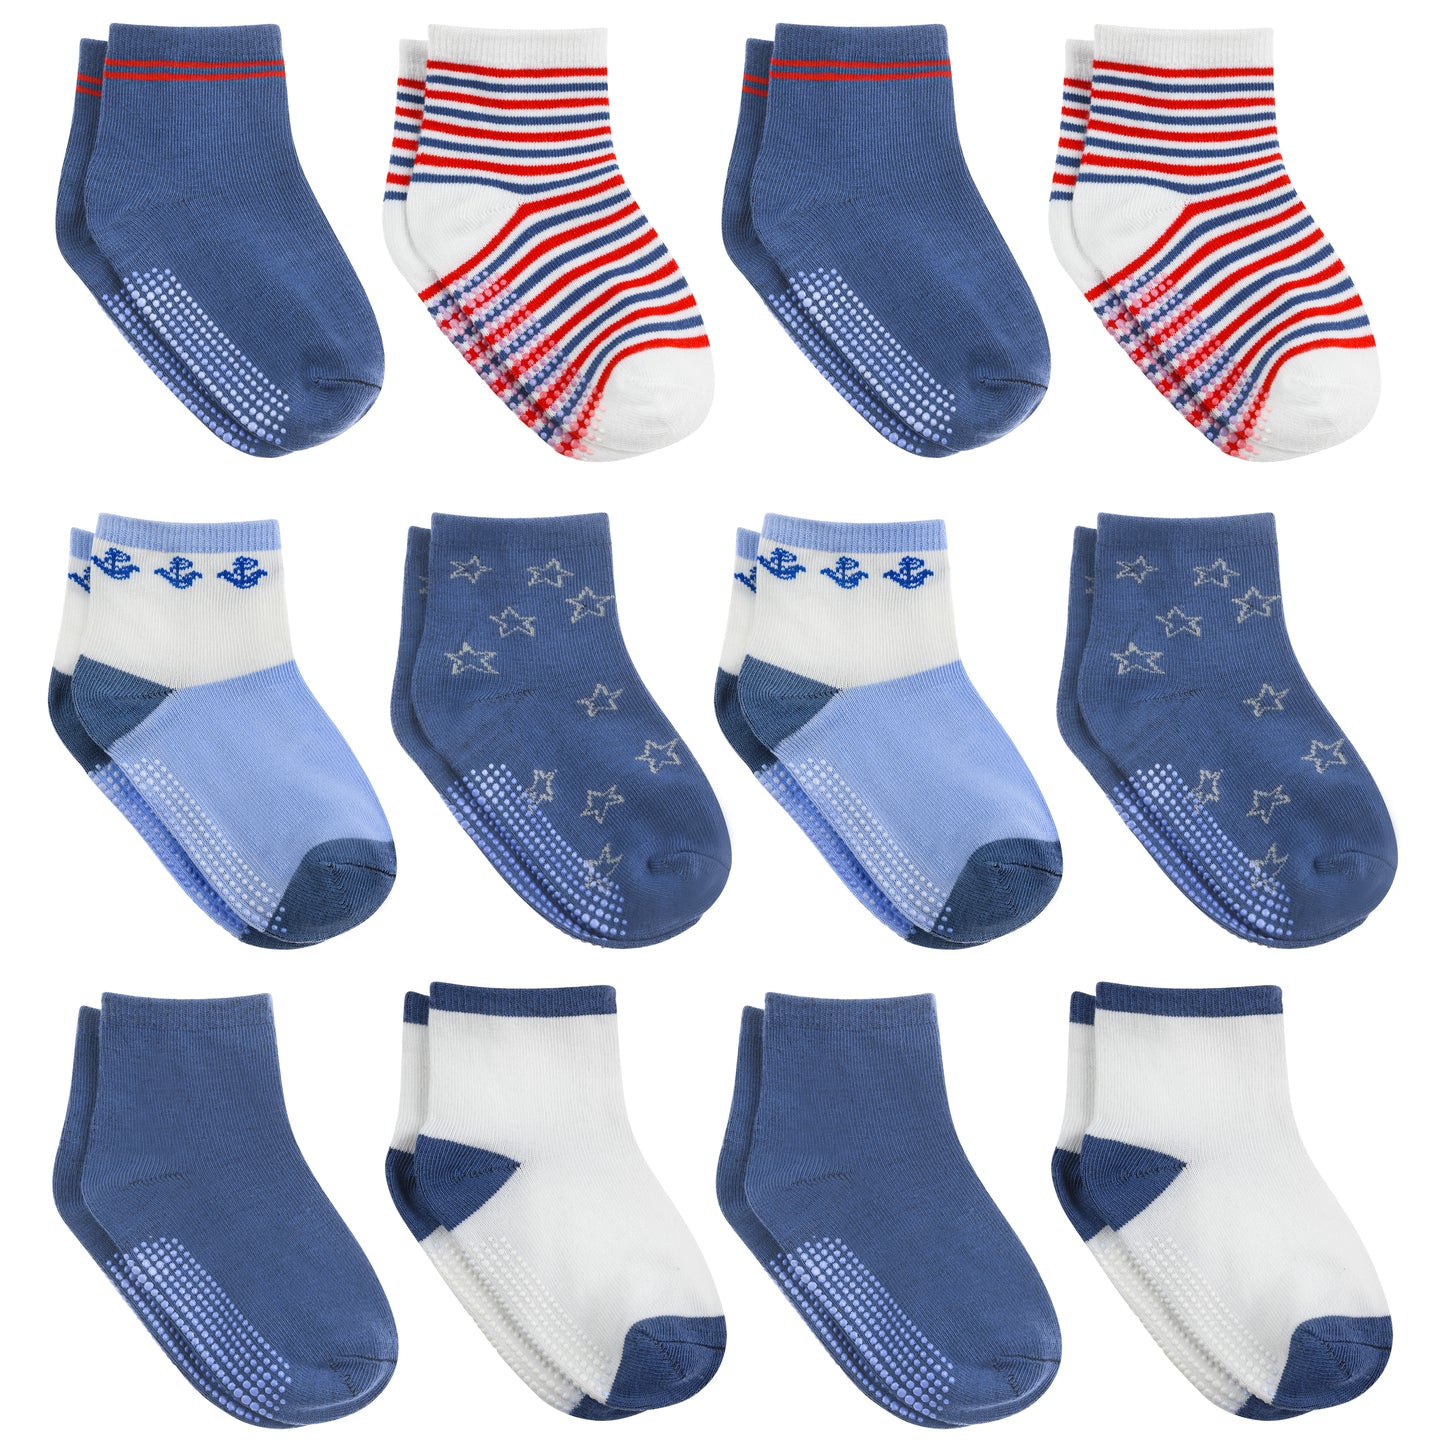 Baby and Toddler Crew Socks- 12 Pairs